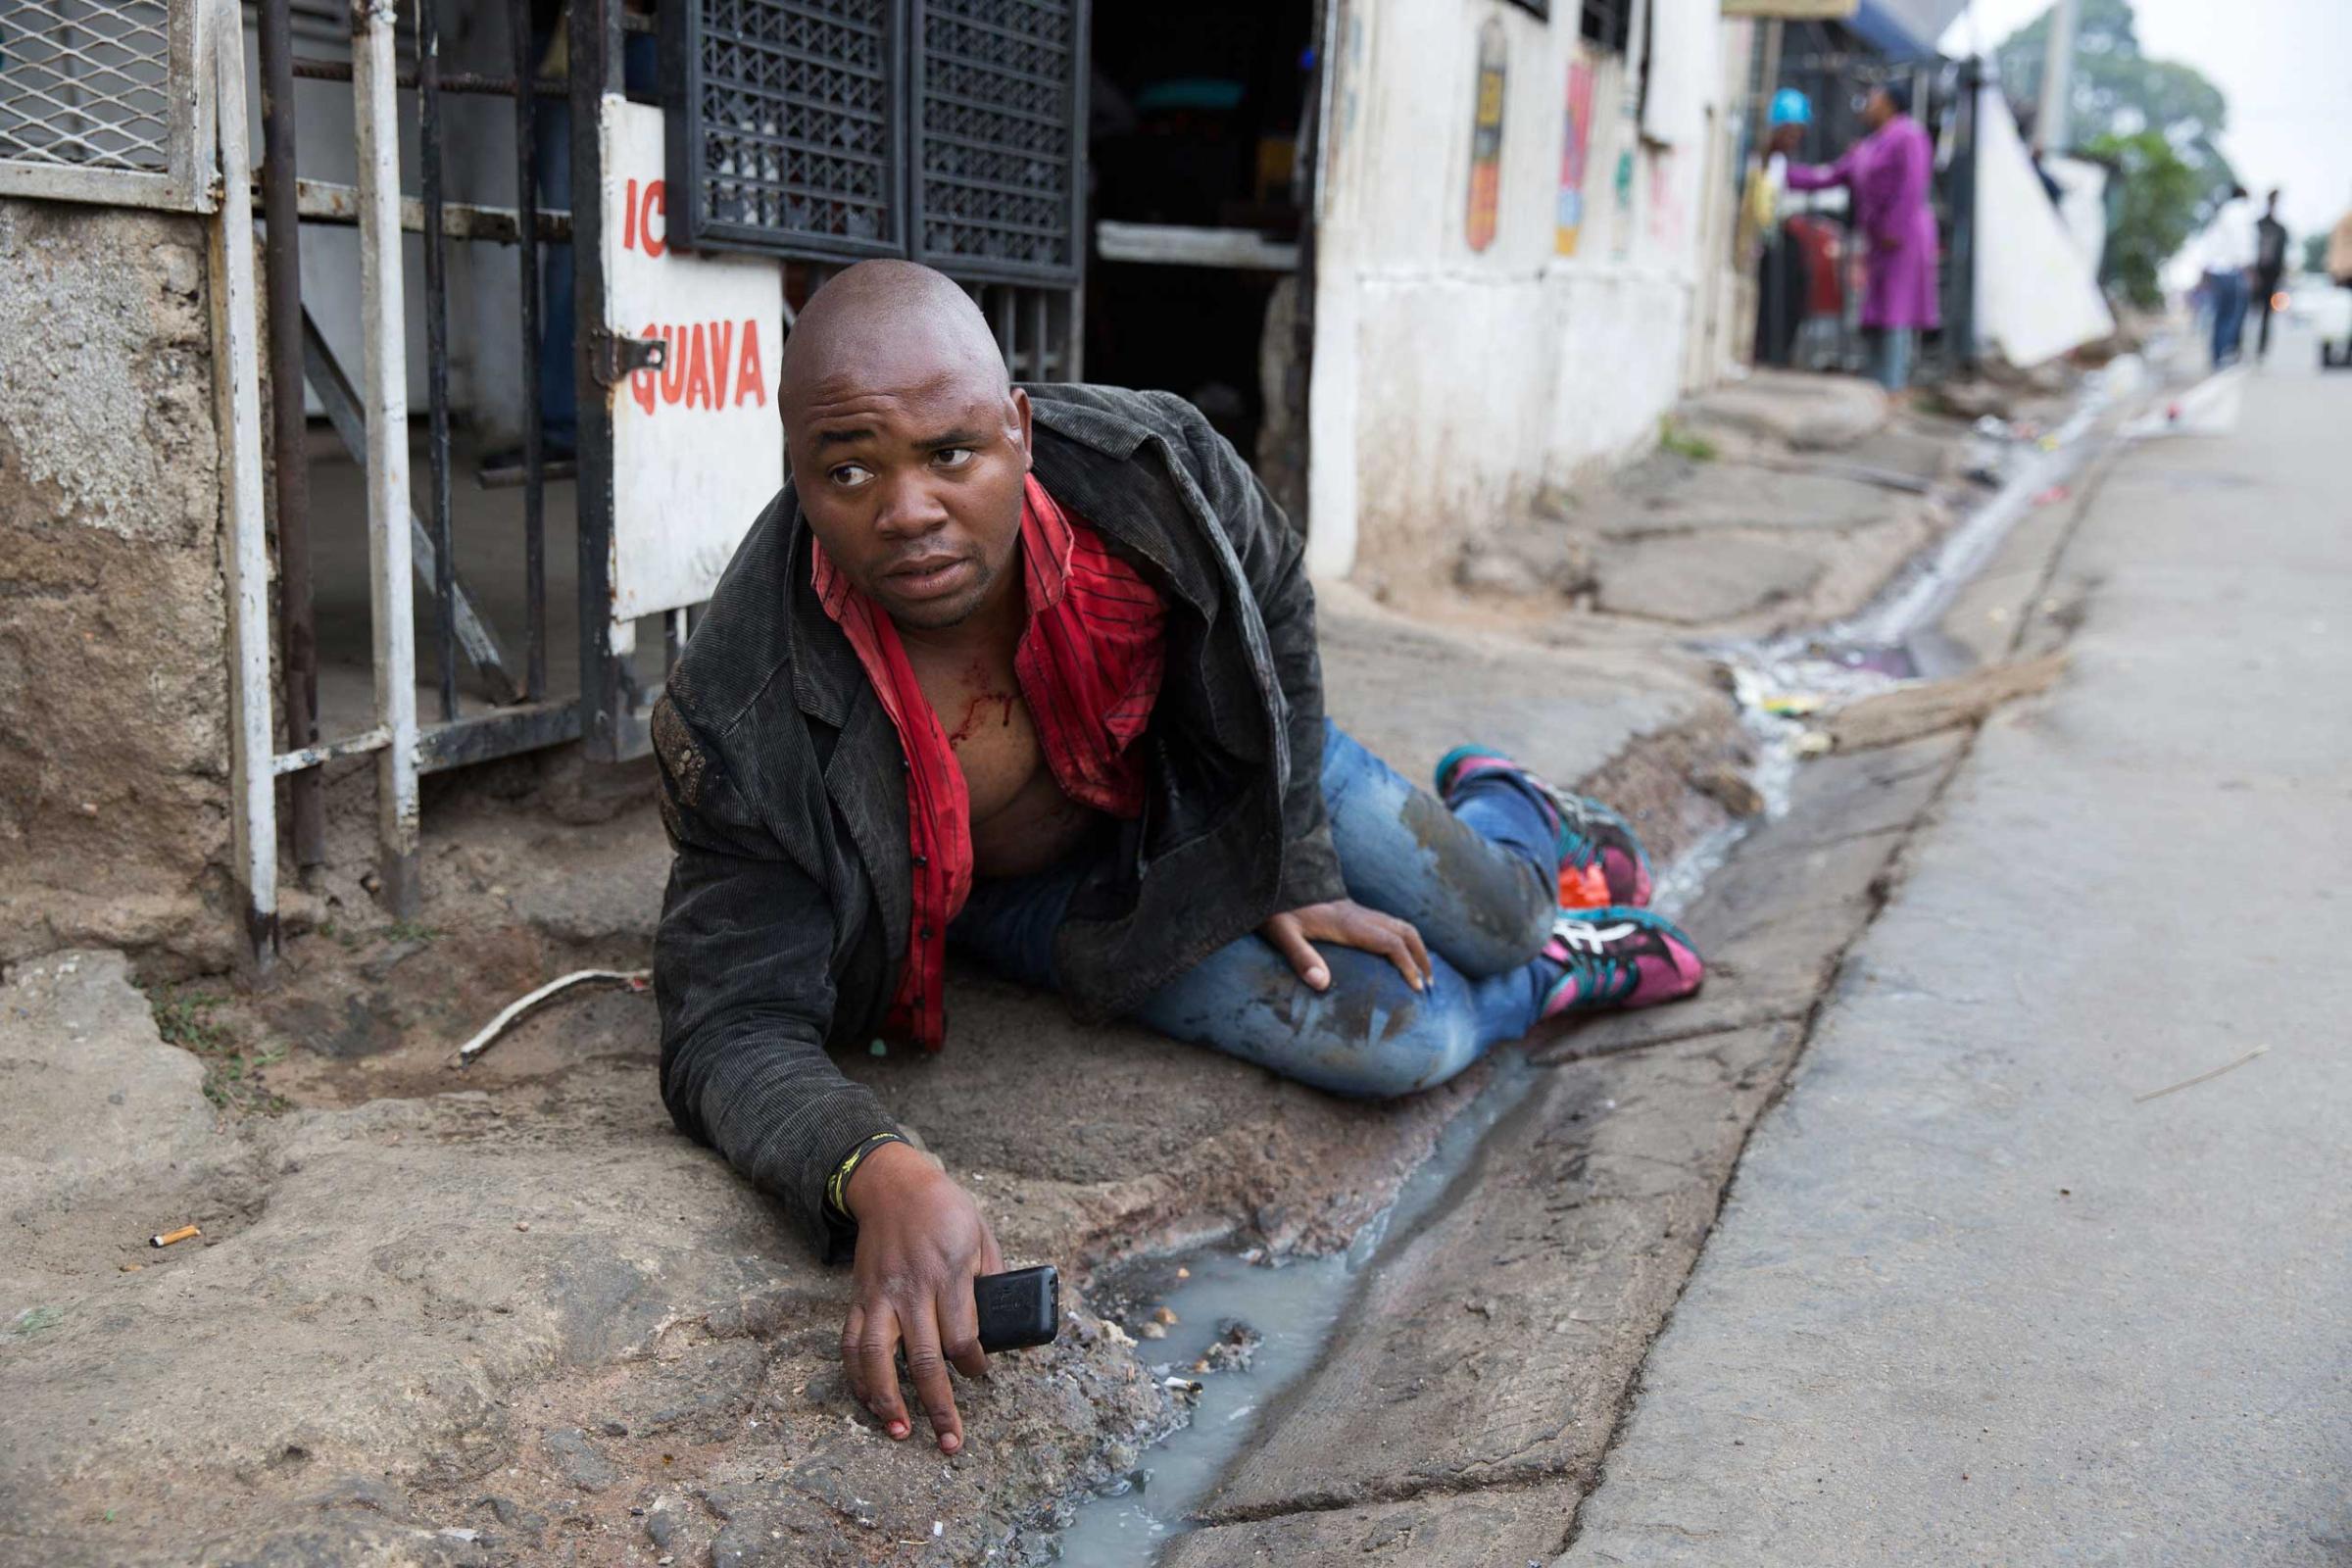 Sithole after being attacked by men in Alexandra township during anti-immigrant violence in Johannesburg on April 18, 2015.